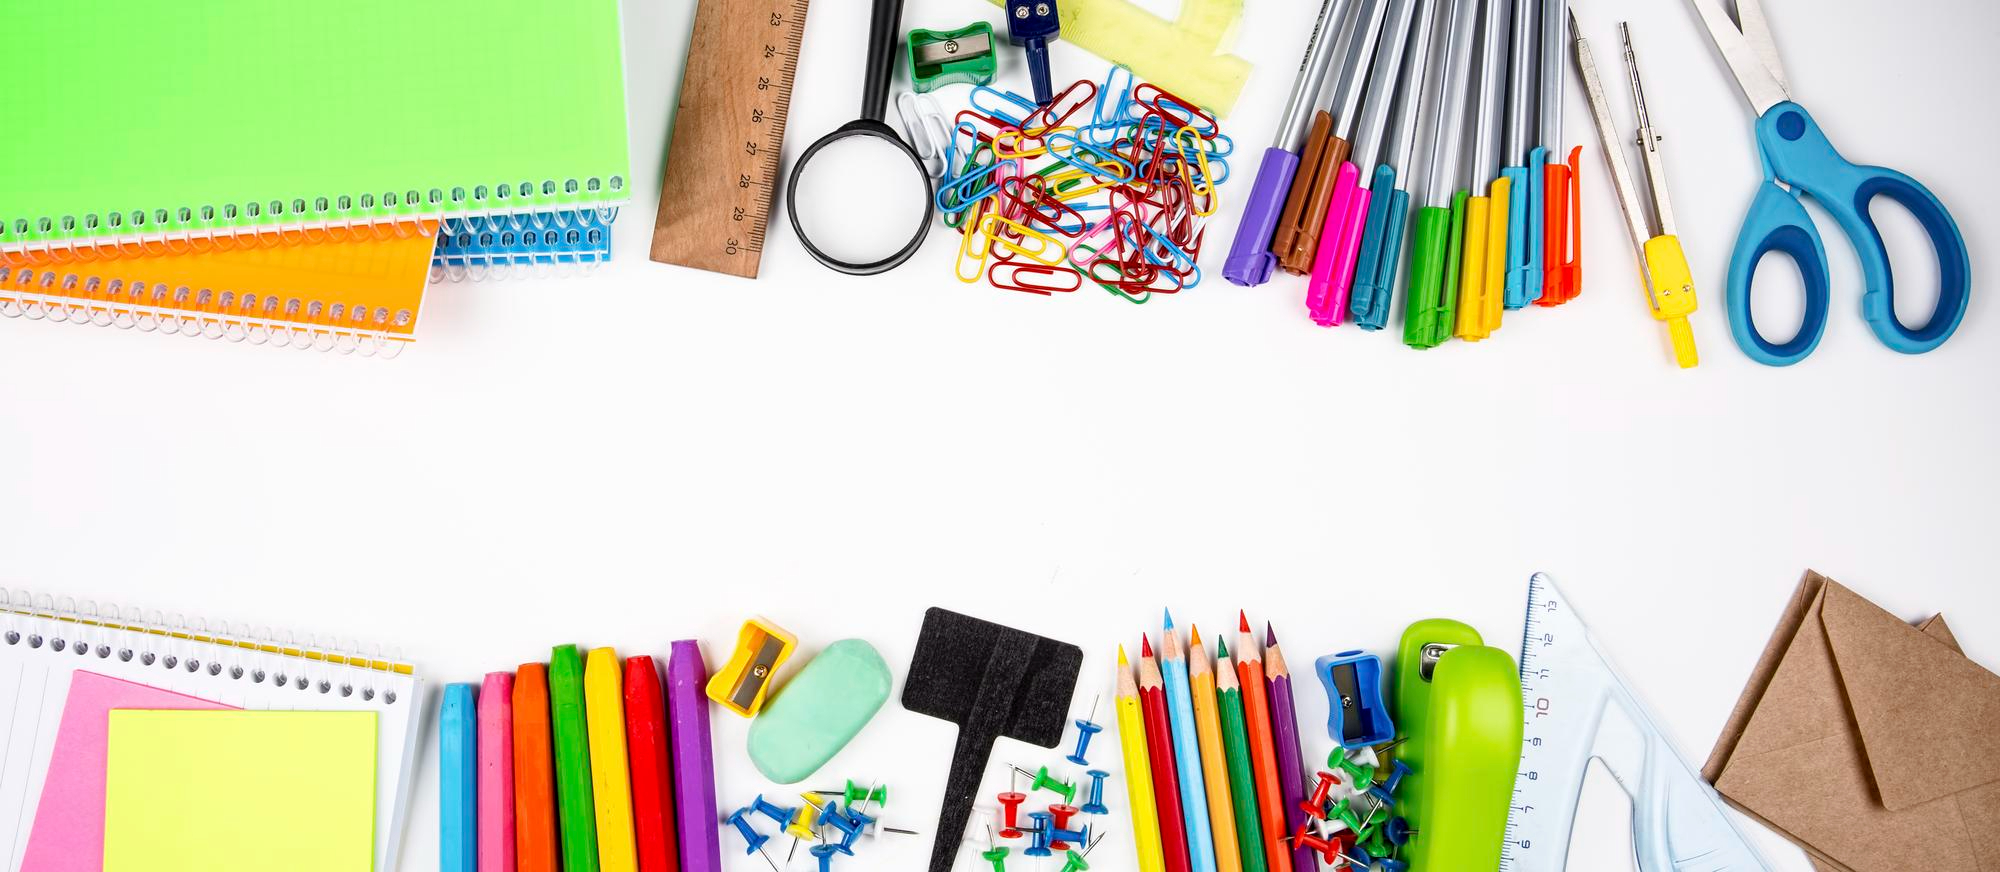 school-office-equipment-colorful-stationery-materials